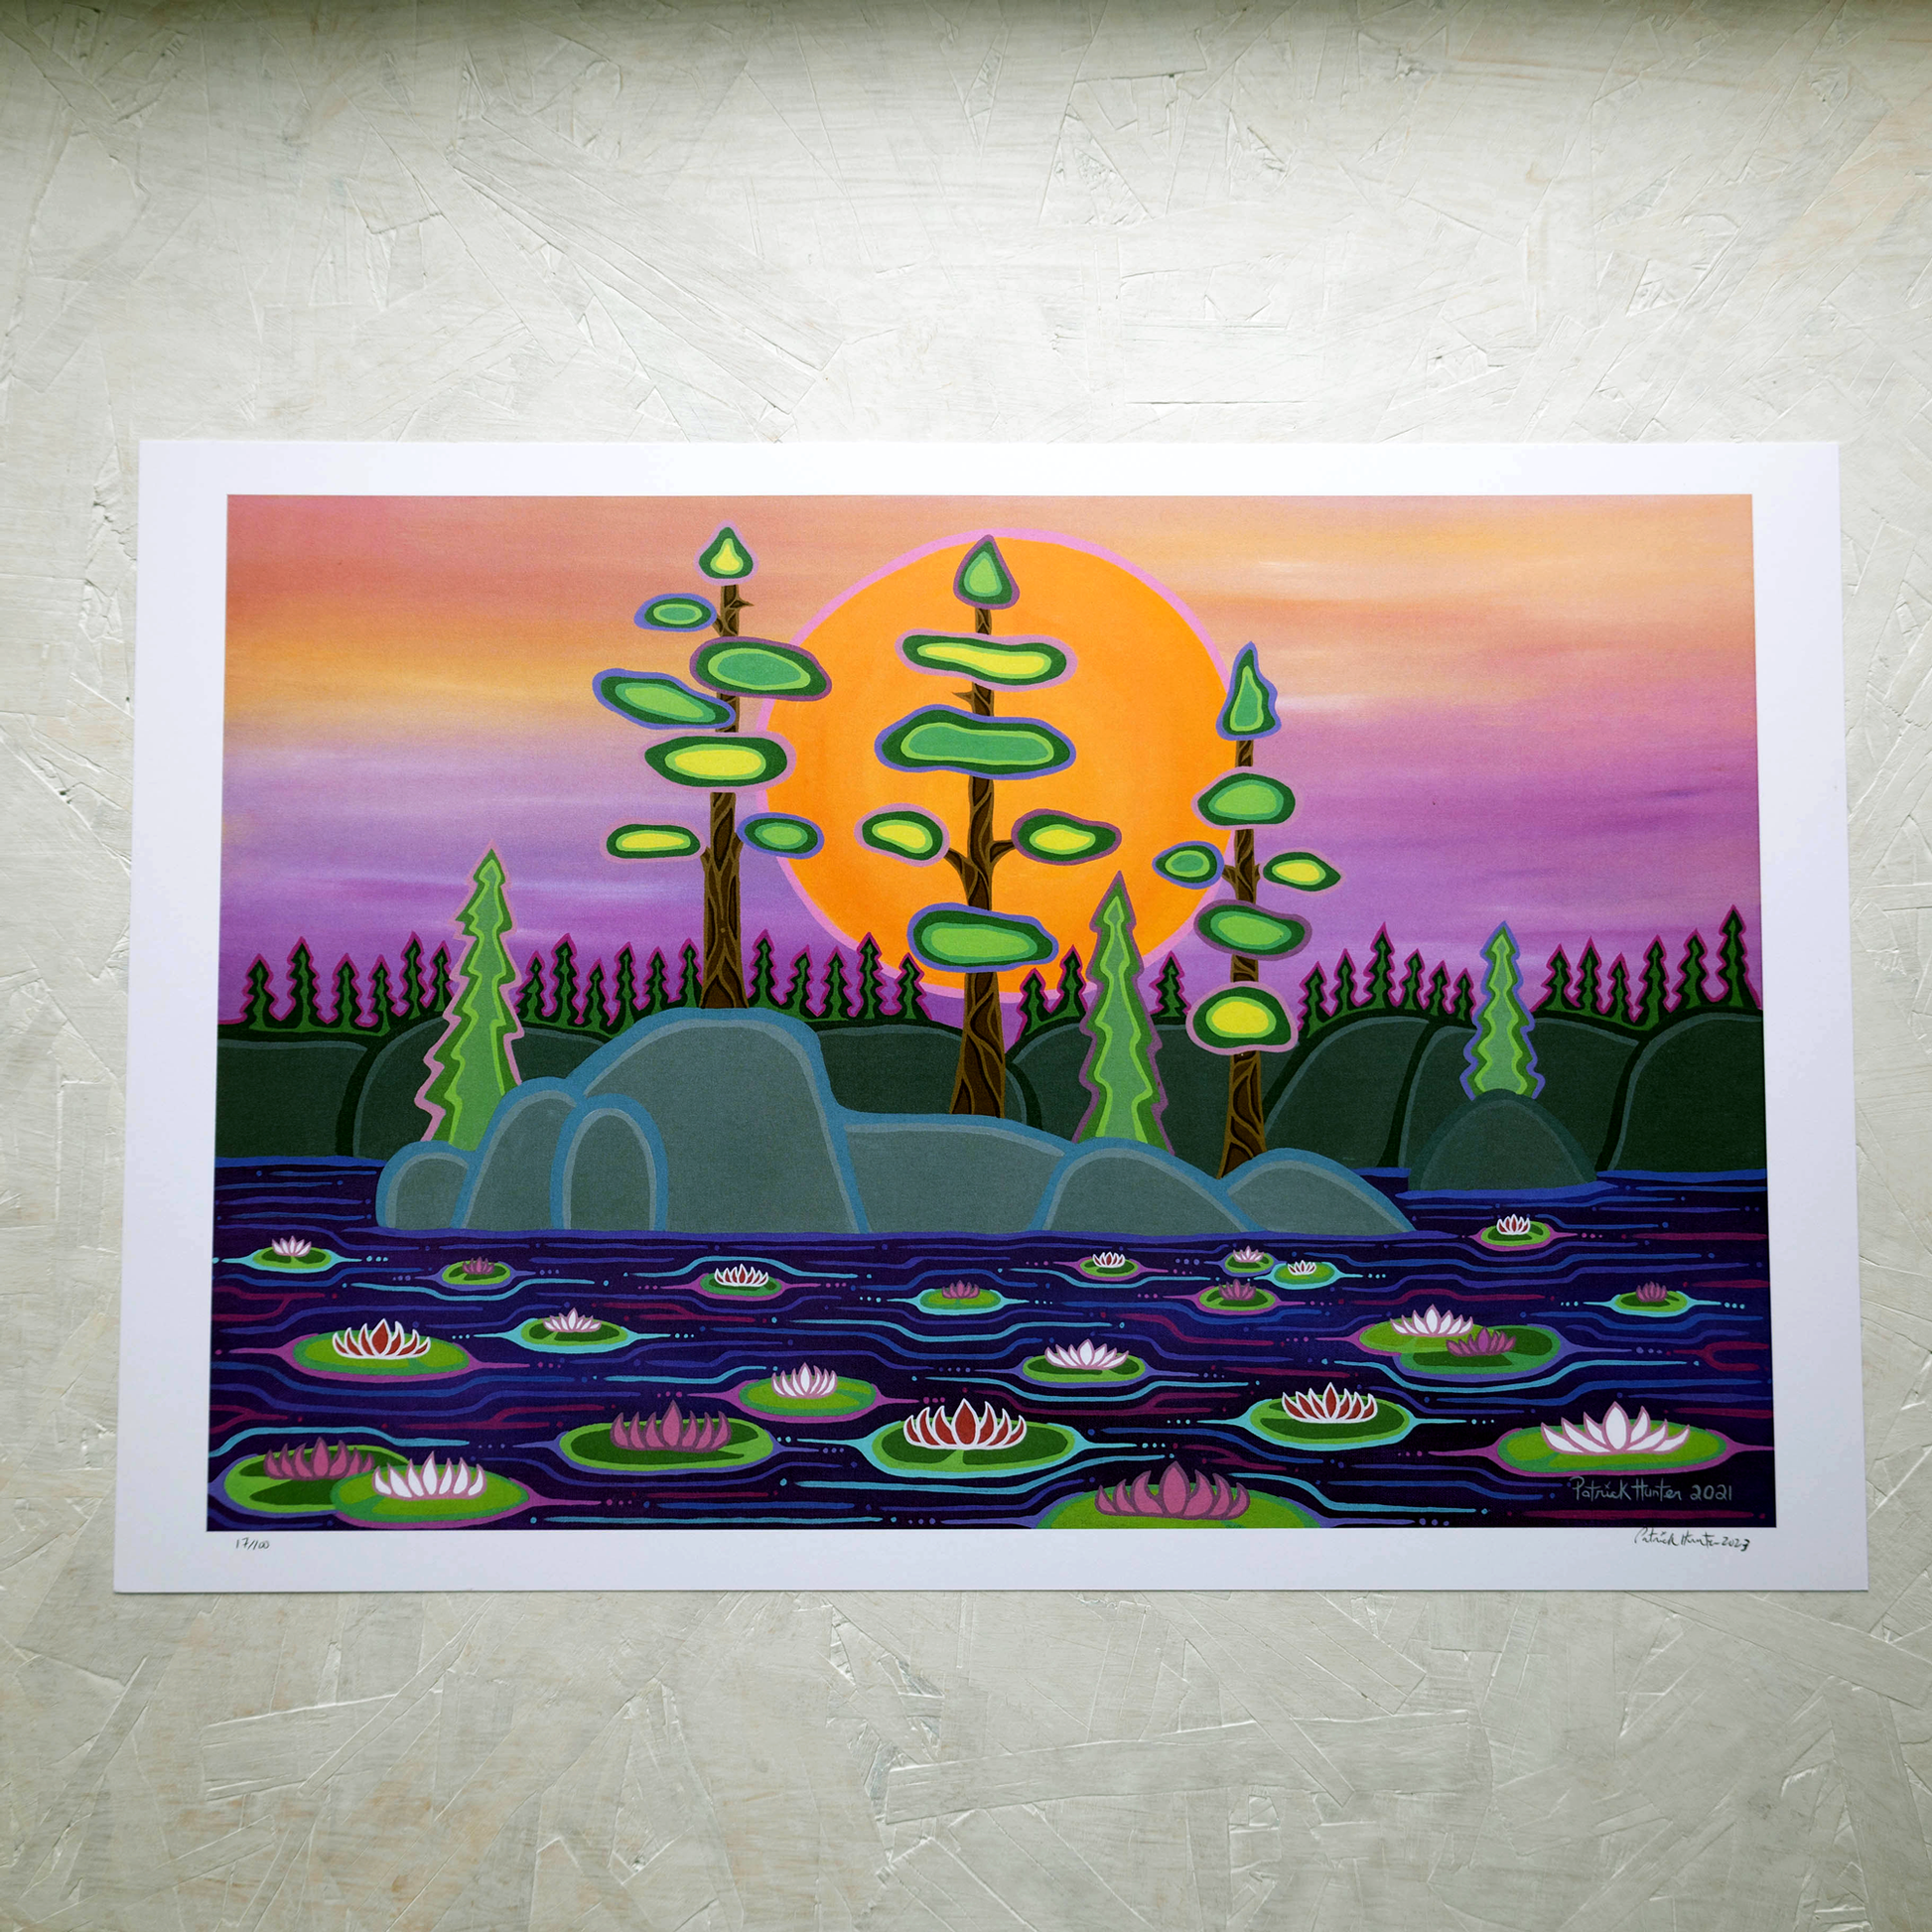 Print of Patrick Hunter's painting of lilypads on water in front of trees, forest, and sun, woodland art style.